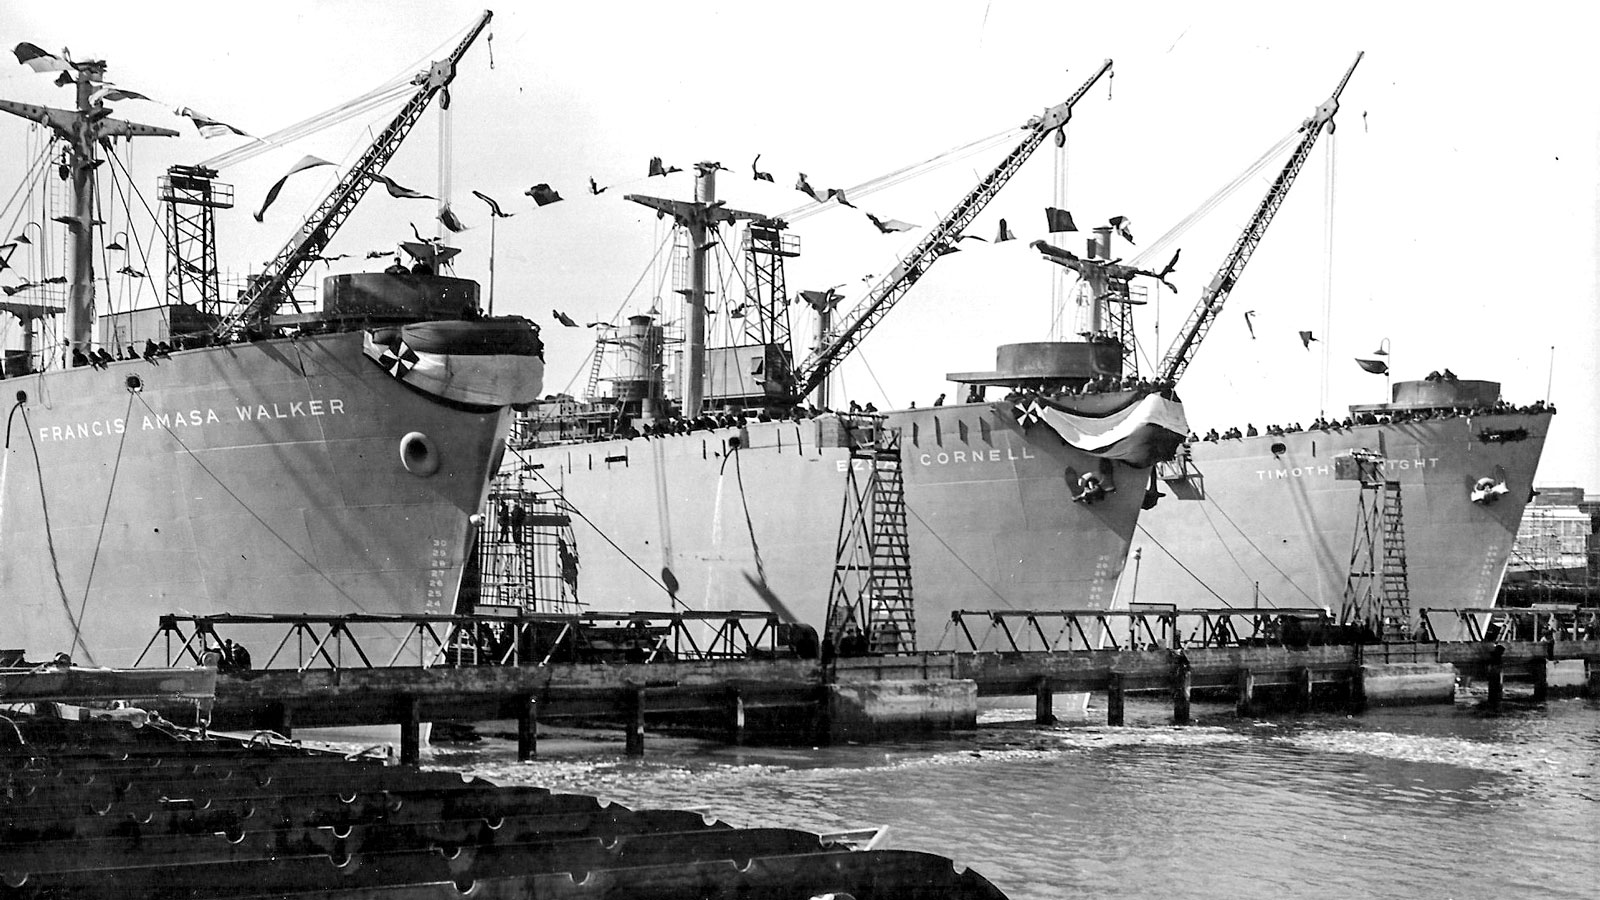 The S.S. Ezra Cornell is pictured alongside two other Liberty ships ready to launch on March 7, 1943, from the Todd-Bath Iron Shipbuilding Corporation in South Portland, Maine